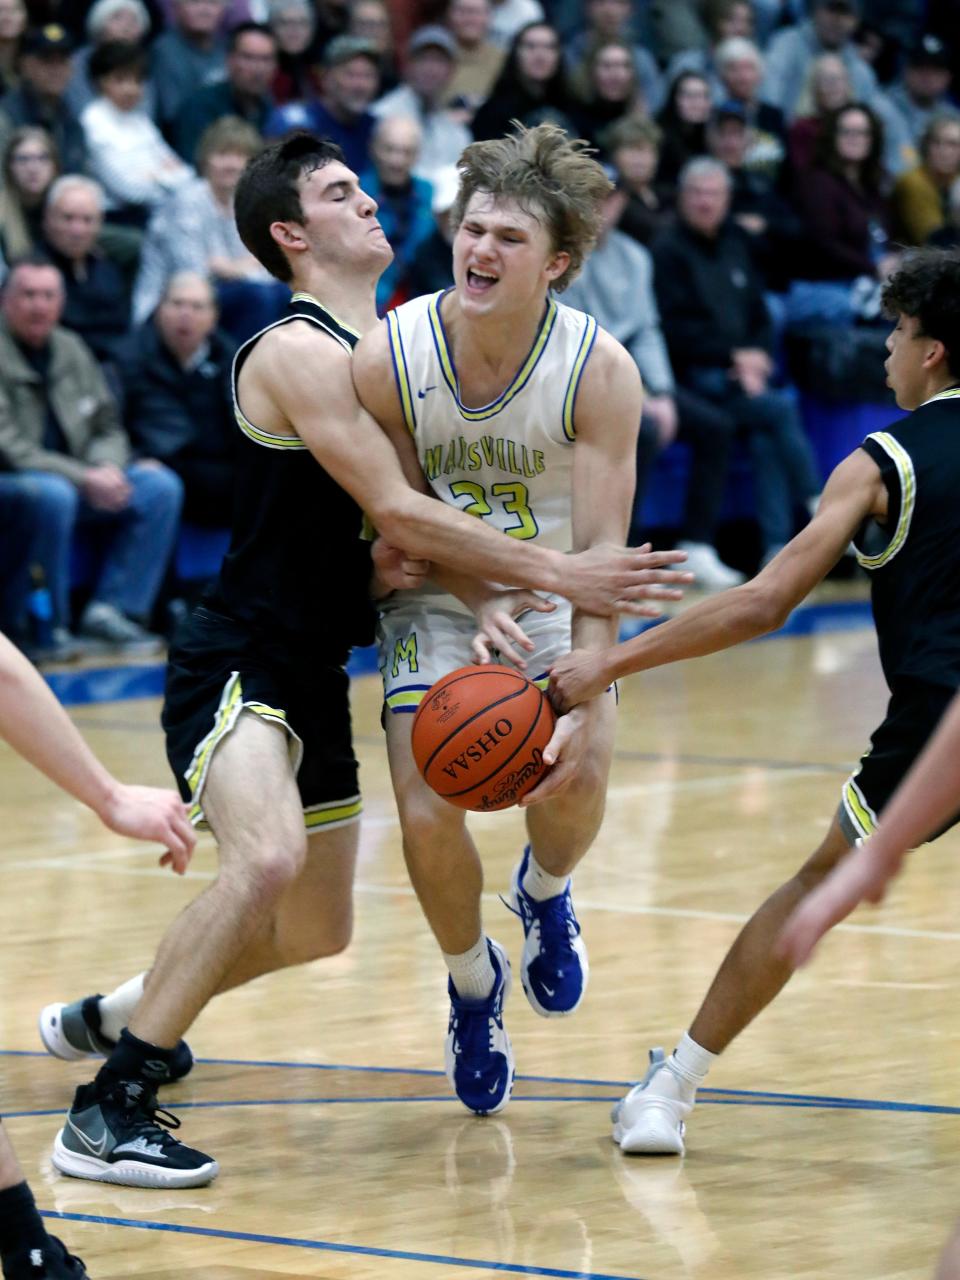 Hayden Jarrett, of Maysville, tries to drive past Tri-Valley's Aaron Frueh during the Panthers' 57-46 win on Friday night in Newton Township. Jarrett scored a game-high 20 points to lead three Maysville players in double figures as they remained unbeaten and alone atop the Muskingum Valley League's Big School Division.